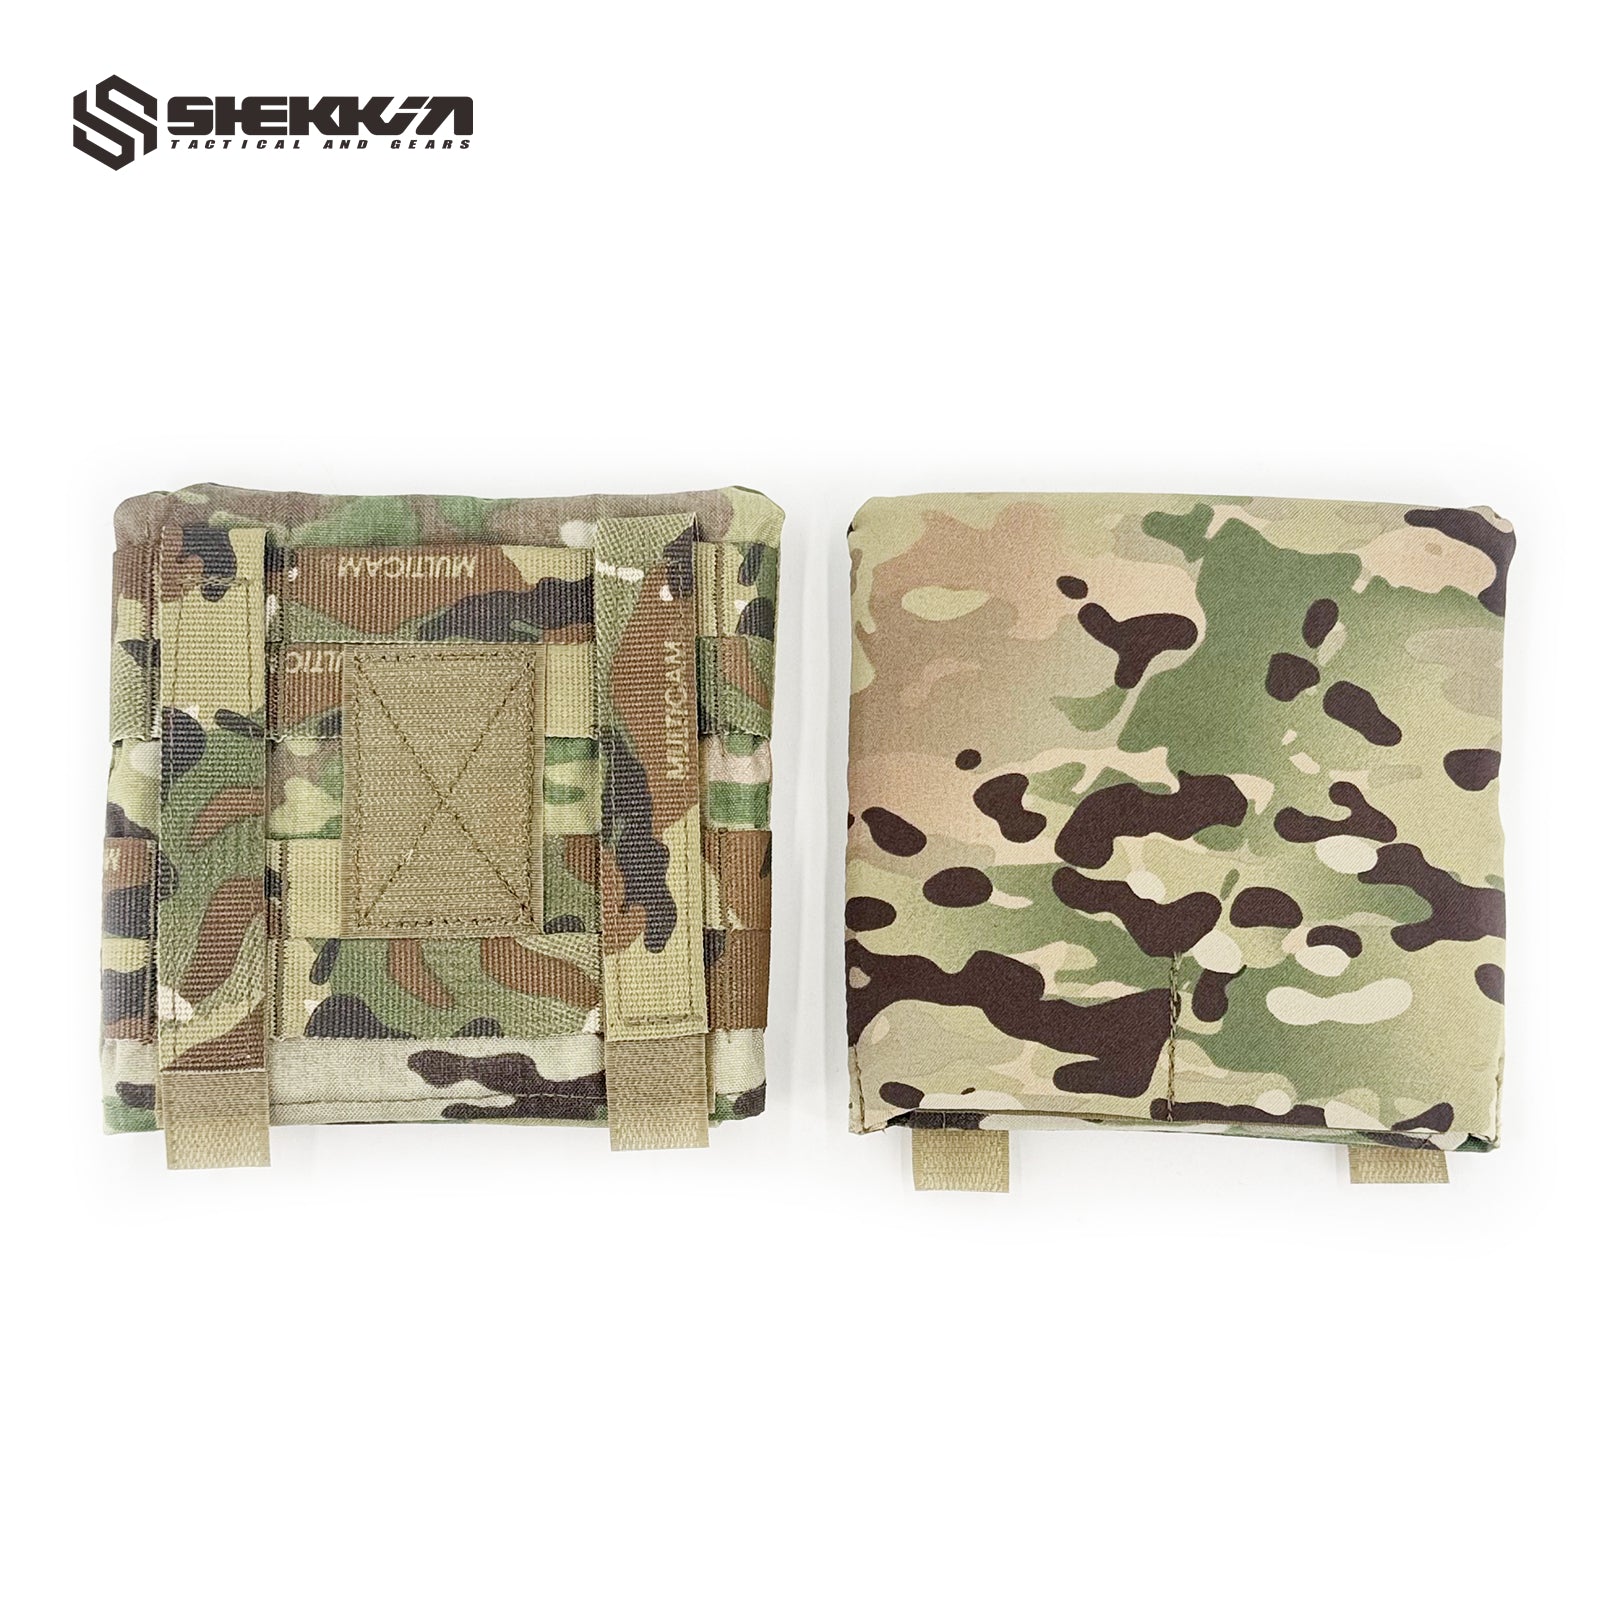 Crye Style 6x6 Side Plate Pouch Set